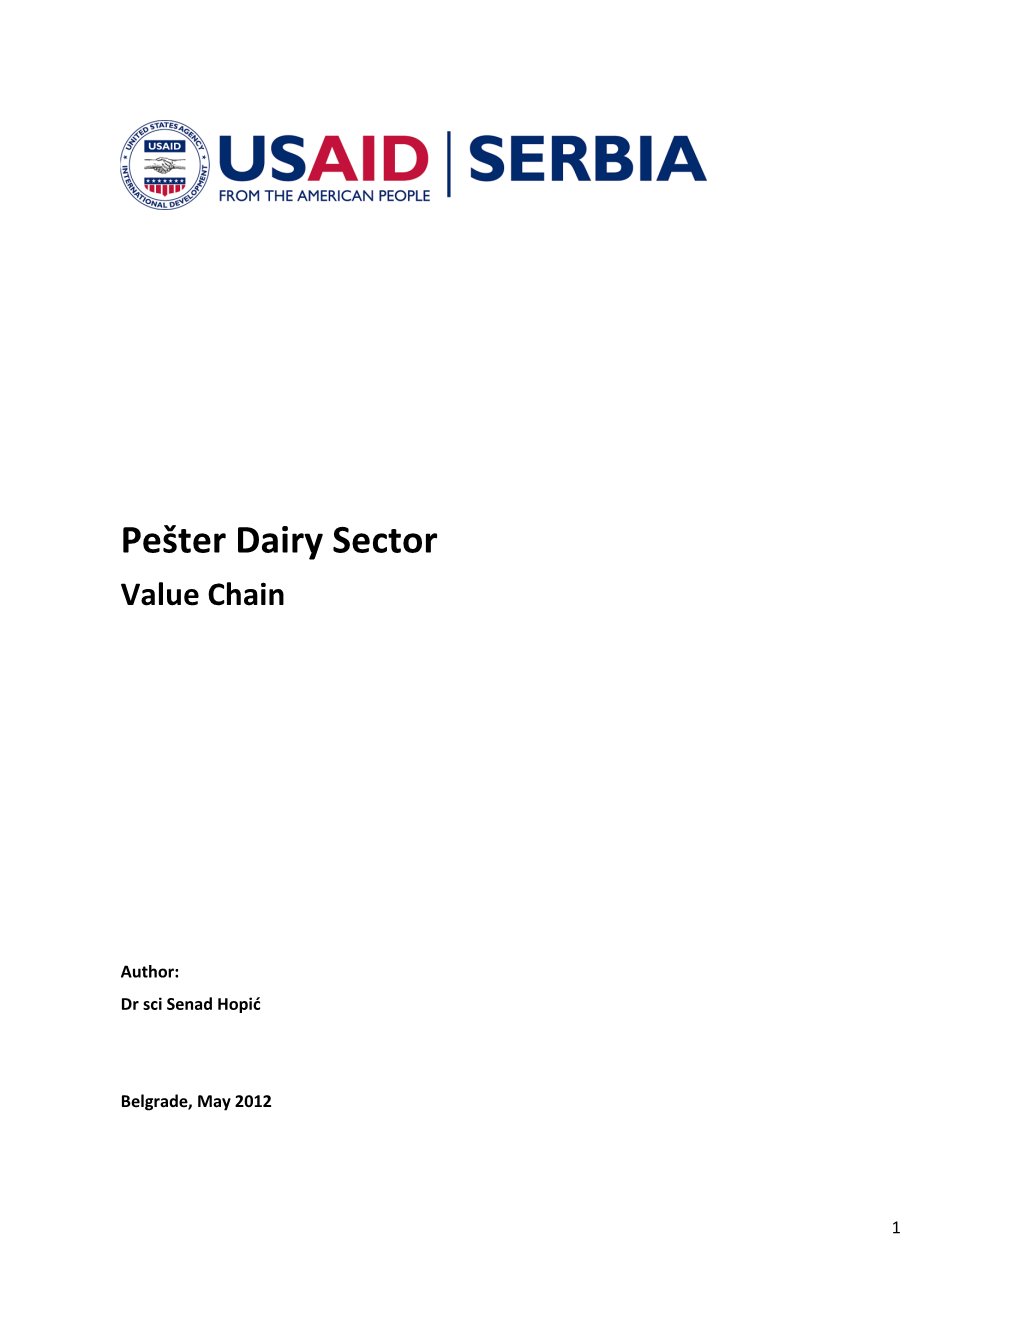 Pešter Dairy Sector Value Chain